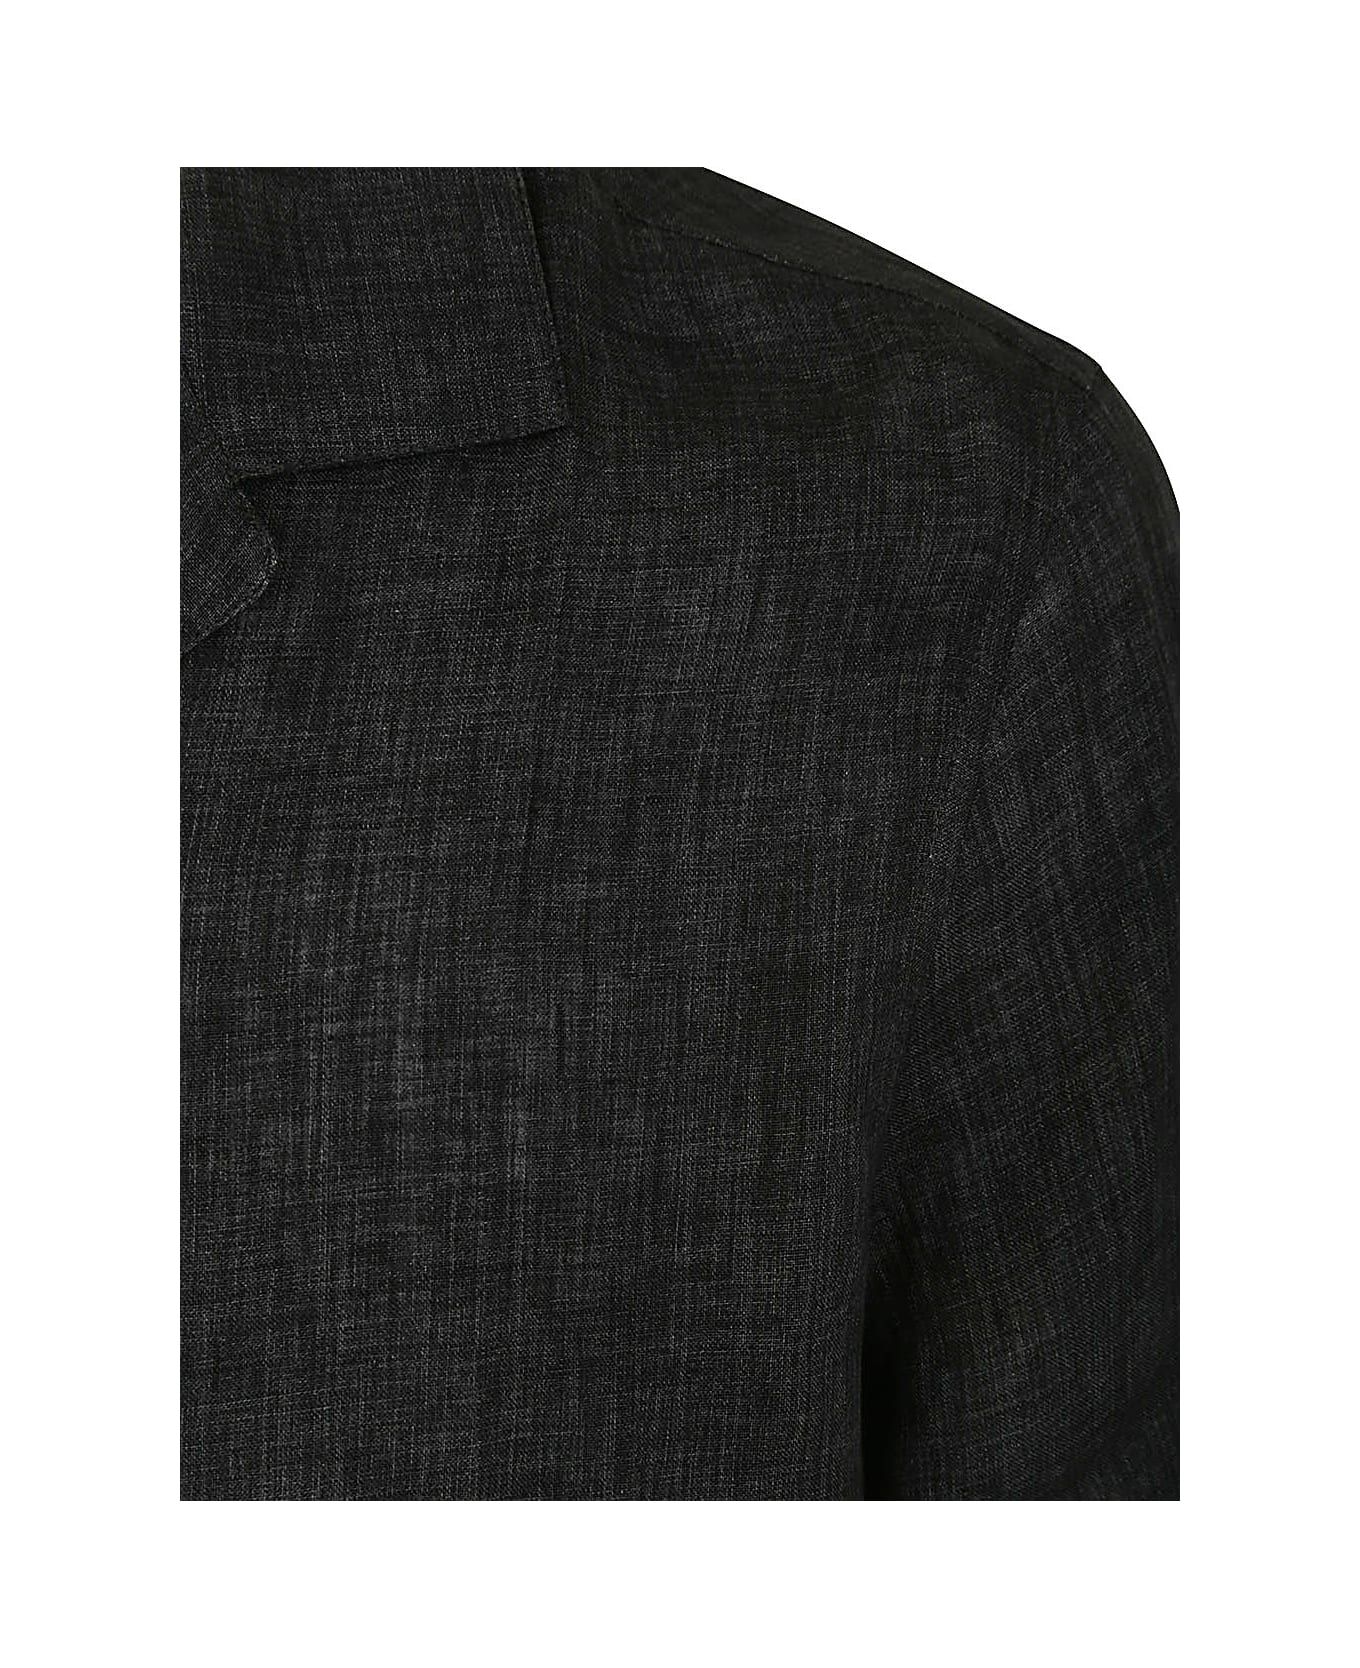 Brunello Cucinelli Chambray Short-sleeved Shirt - Anthracite